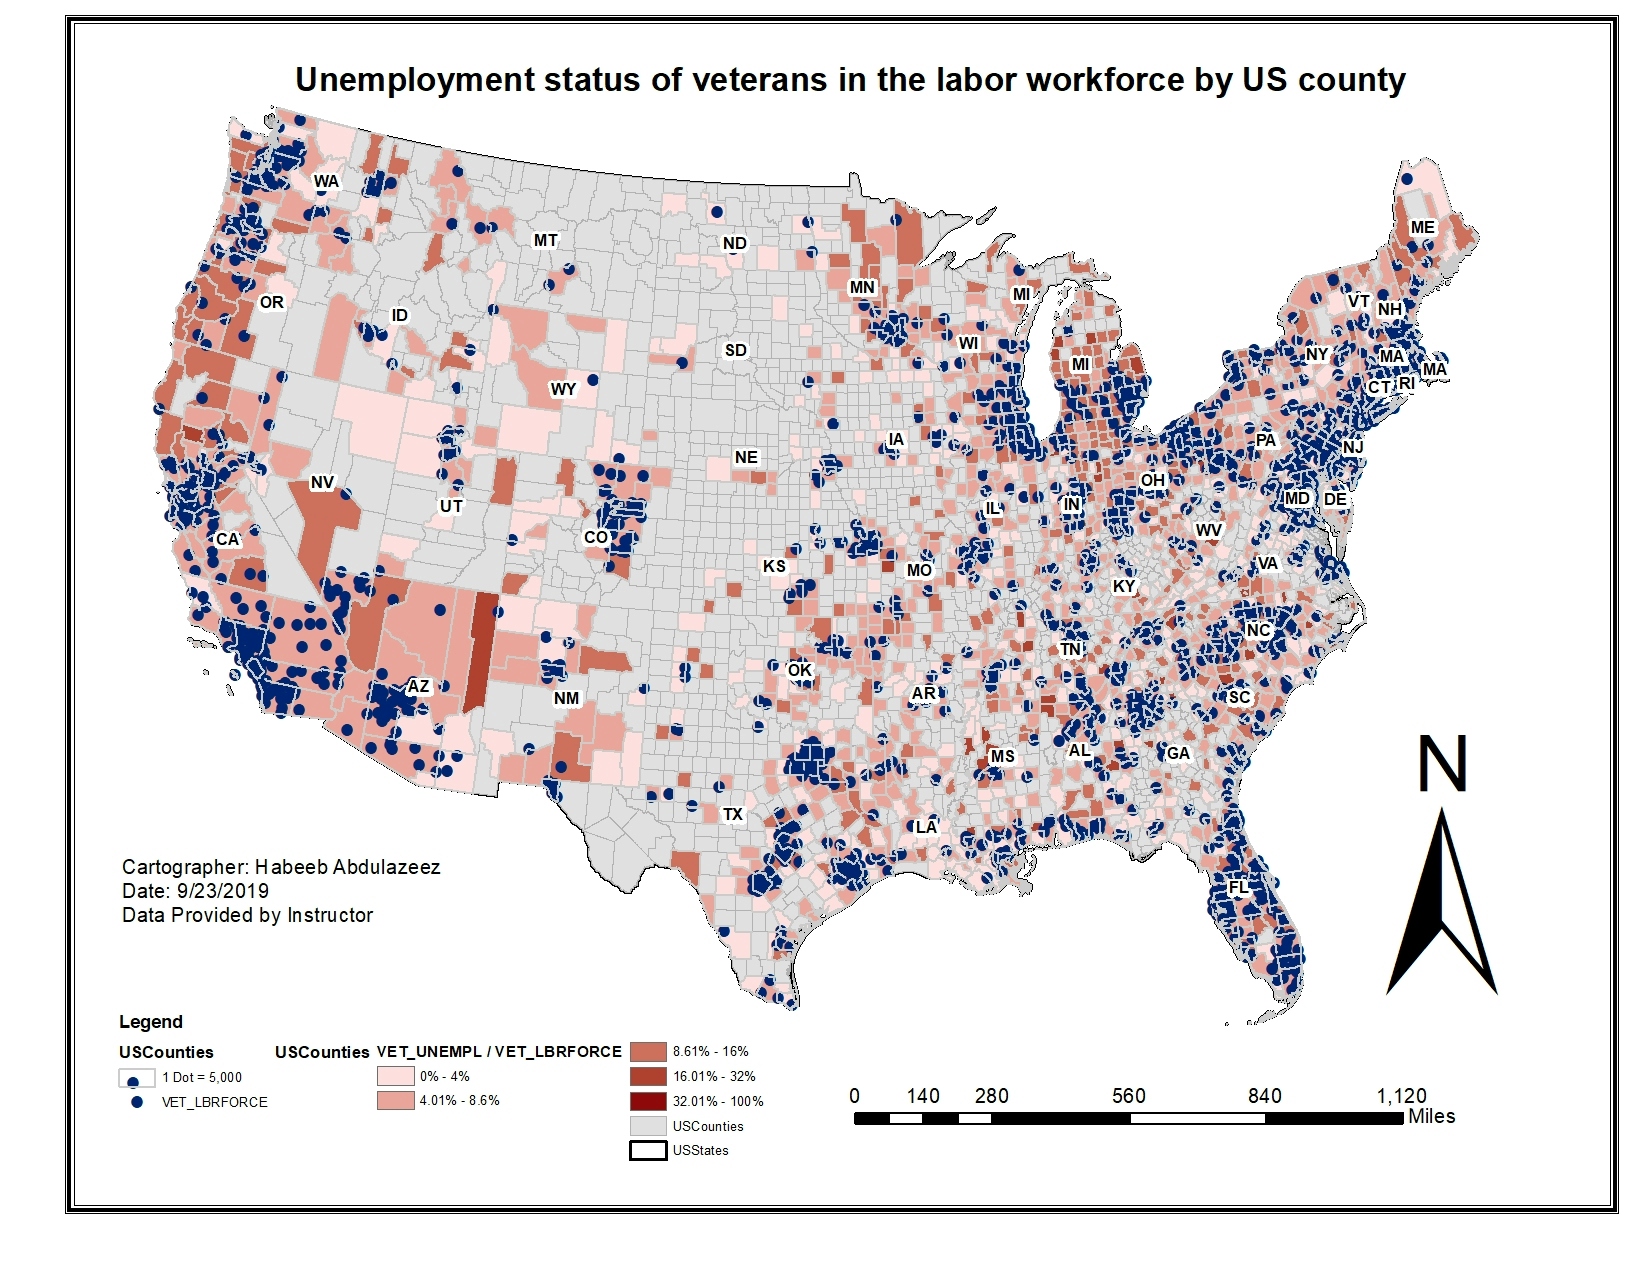 Unemployment status of veterans in the labor workforce by US county 2009